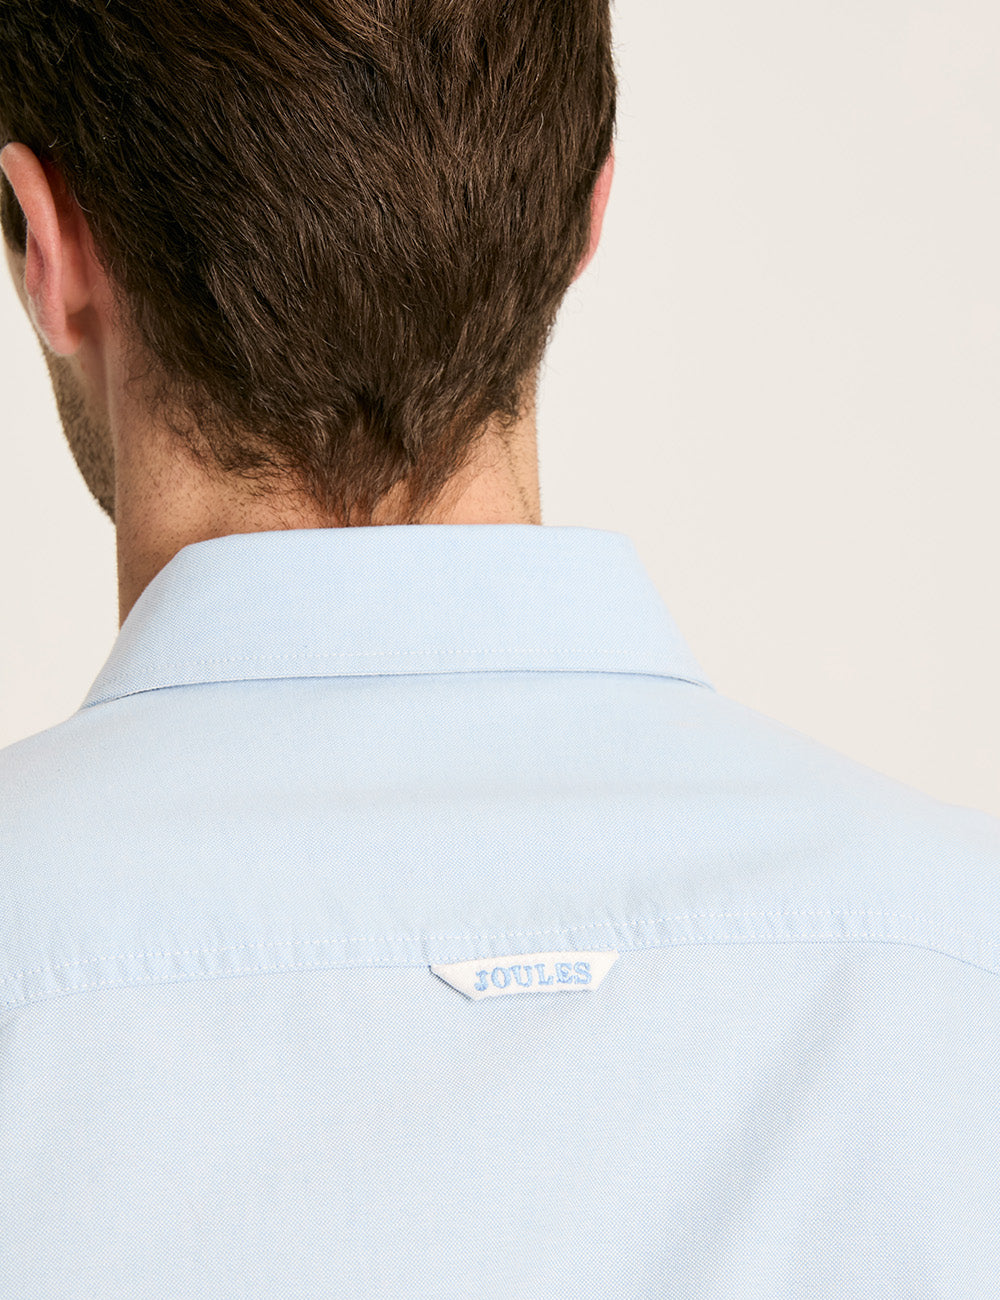 Joules Oxford Shirt - Blue